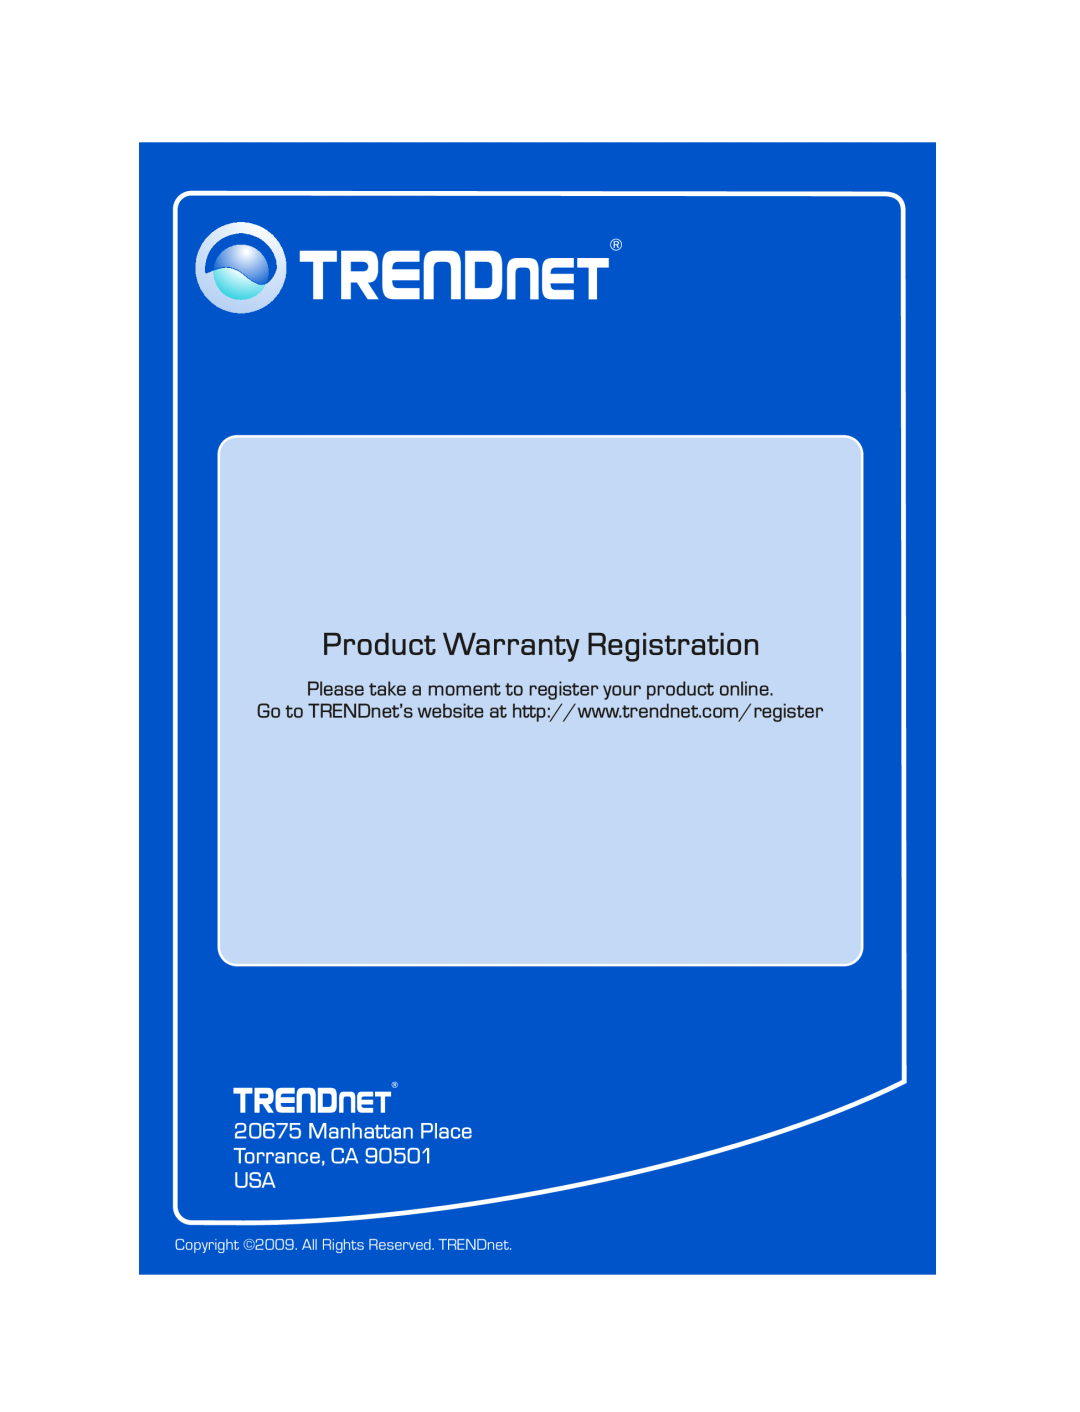 TRENDnet Wireless Router, TEW-639GR manual Manhattan Place Torrance, CA USA, Product Warranty Registration 